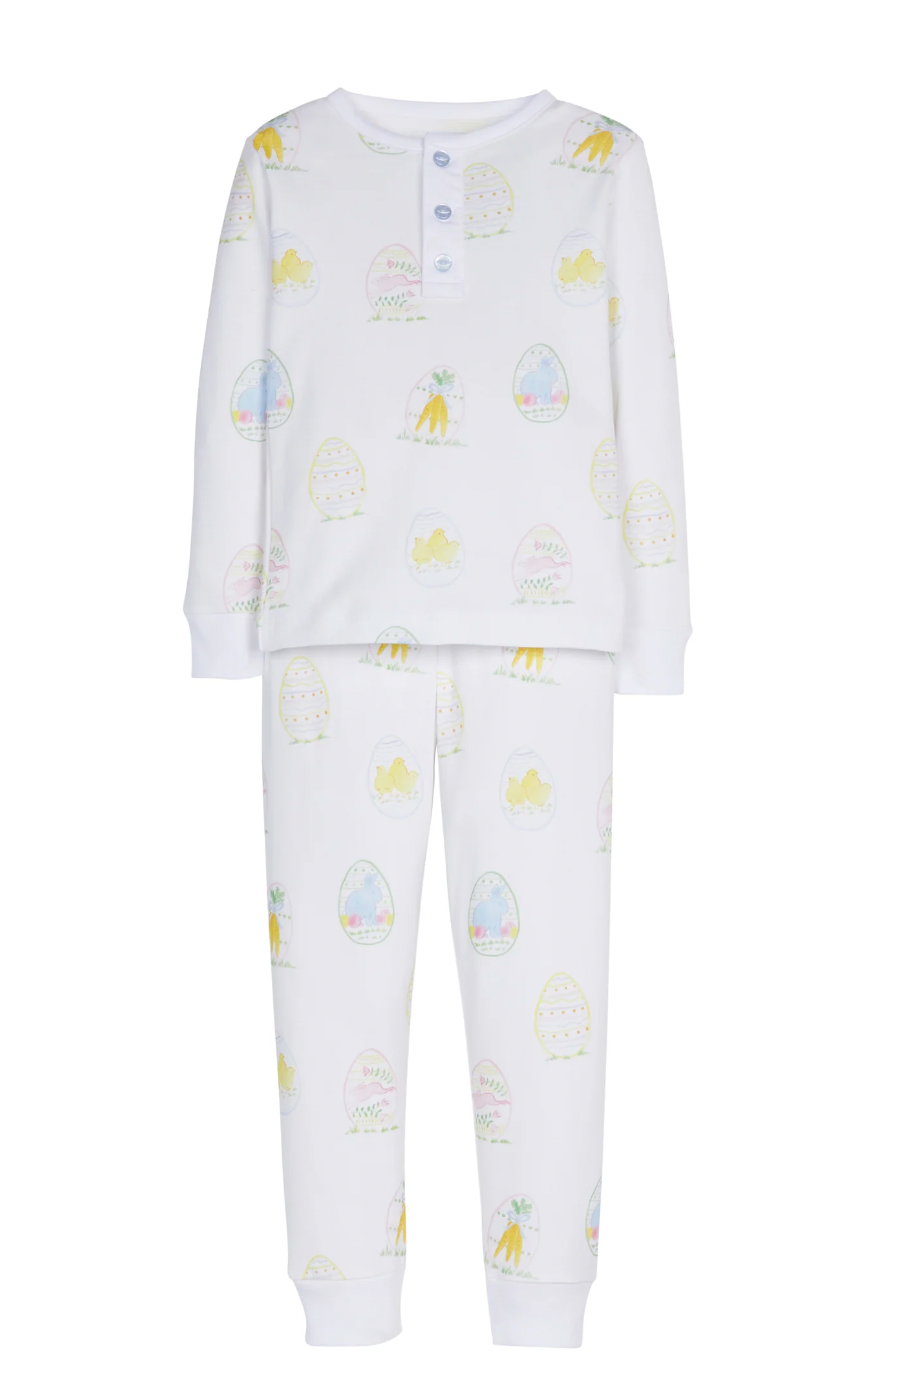 Little English- Printed Jammies in Easter Eggs for Boys